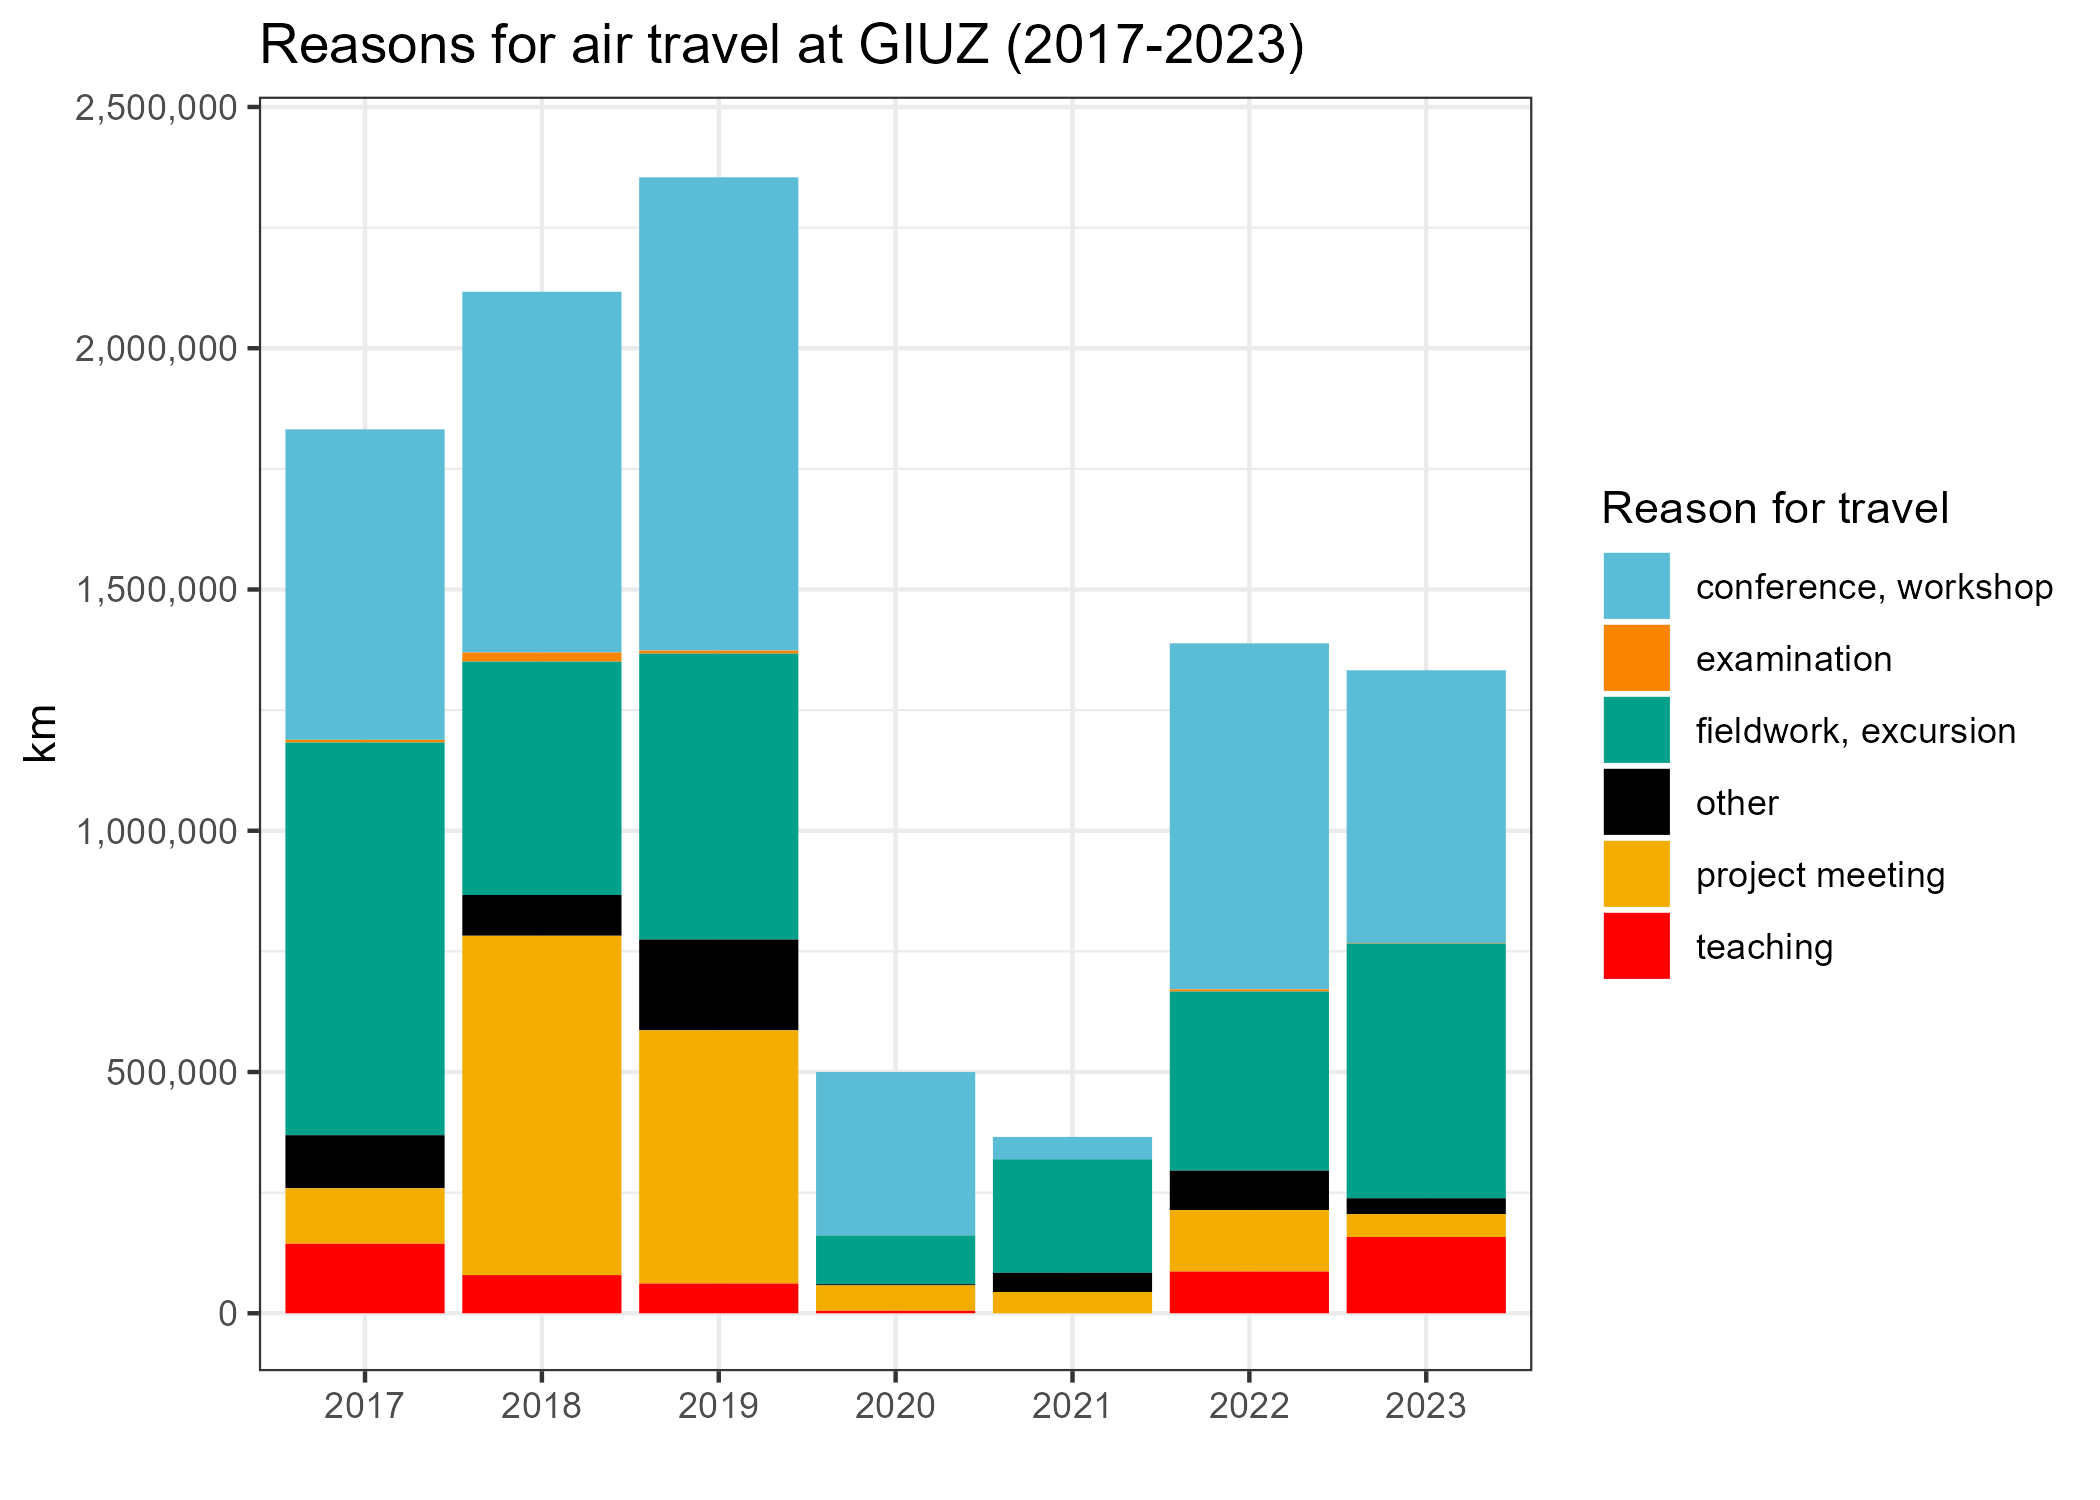 Reasons for air travel at GIUZ (2017-2023)